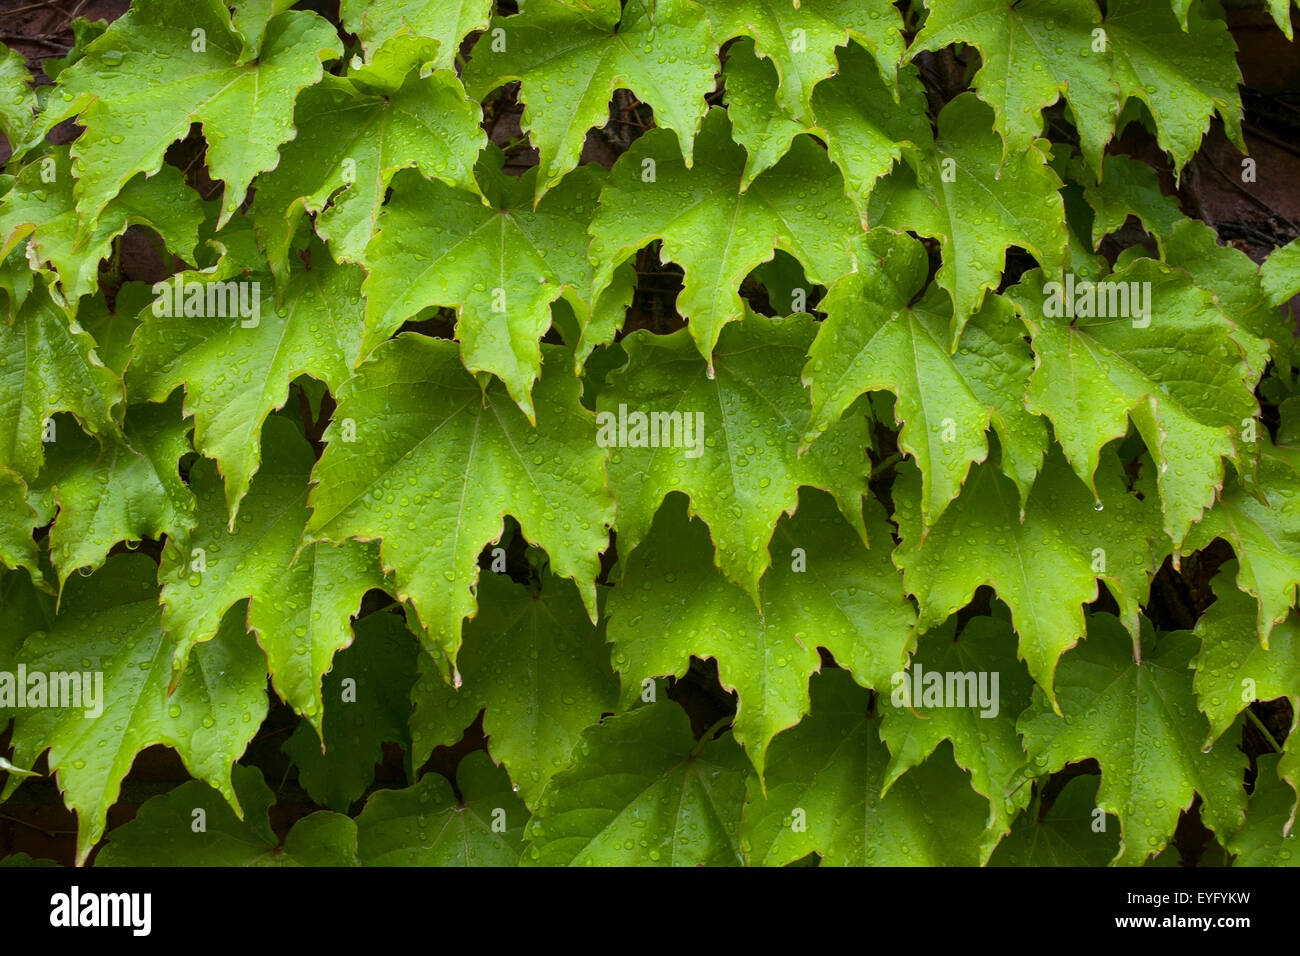 Vines on brick wall, Granby, Eastern Townships, Quebec, Canada Stock Photo